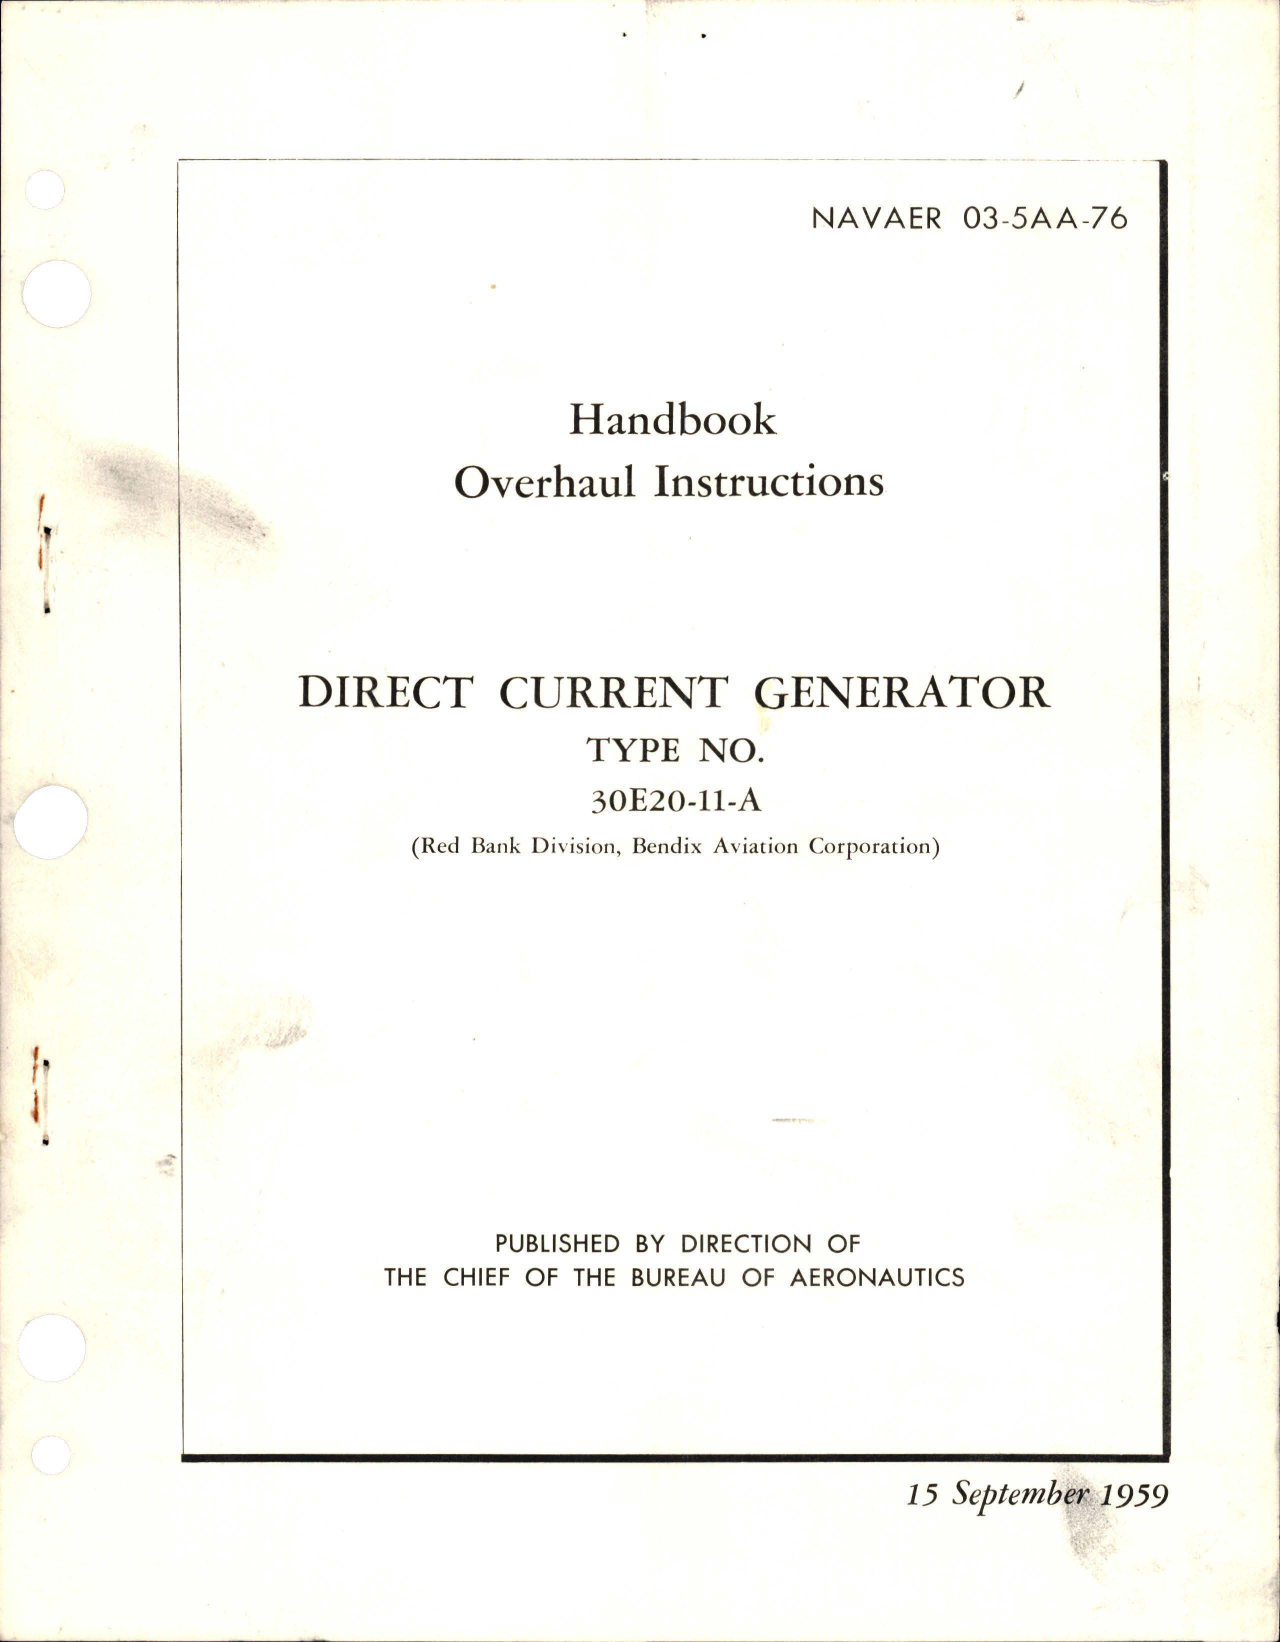 Sample page 1 from AirCorps Library document: Overhaul Instructions for Direct Current Generator - Type 30E20-11-A